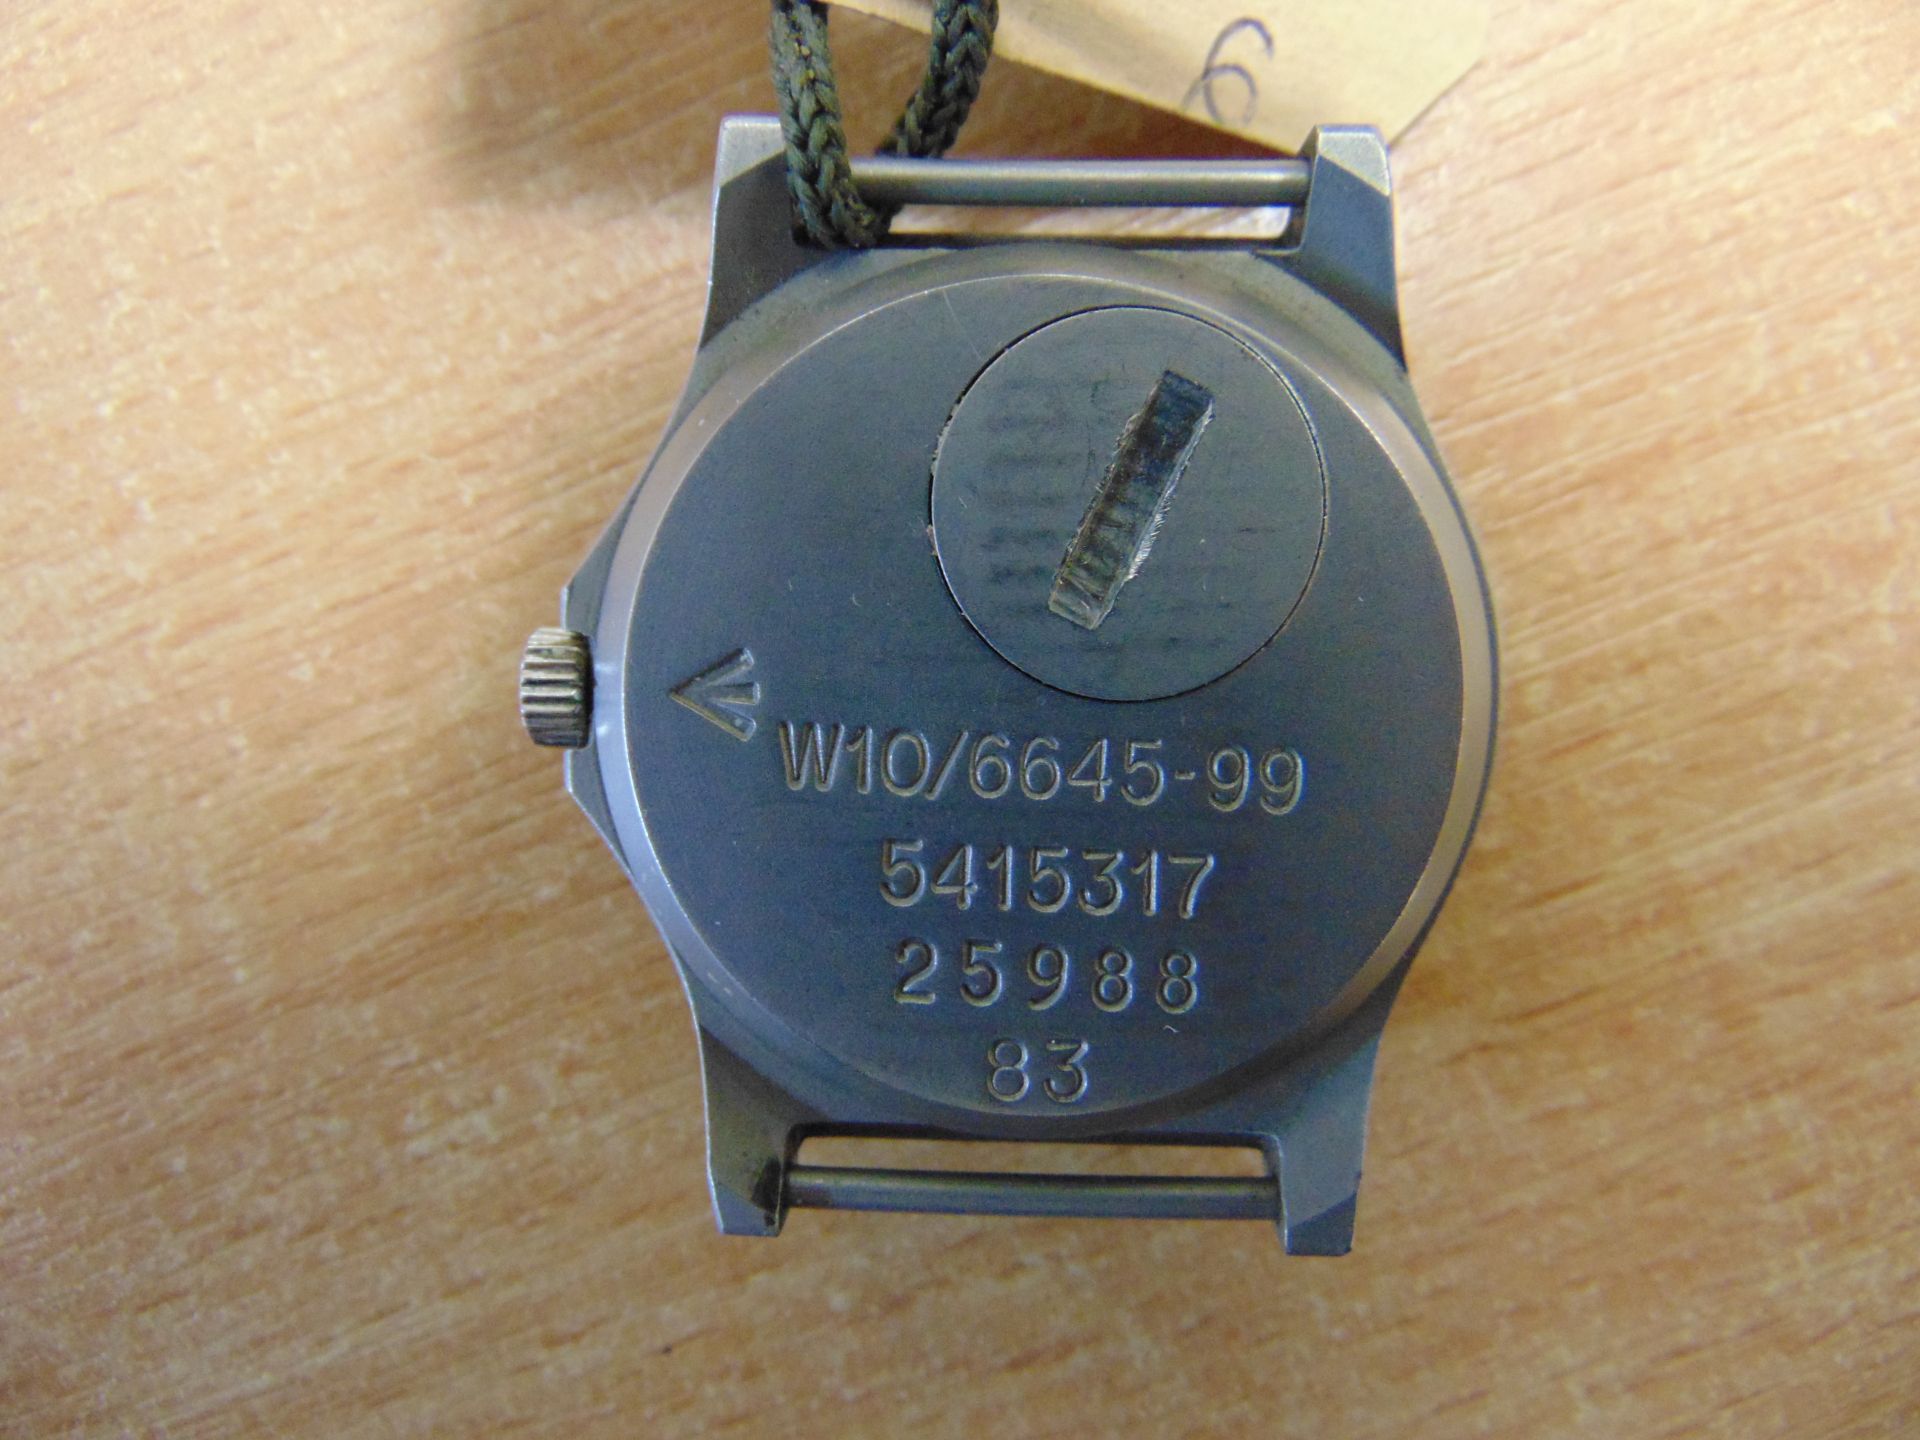 VERY NICE CWC W10 BRITISH ARMY SERVICE WATCH FAT BOY DATE 1983 NATO MARKS SN.25988 - Image 4 of 6